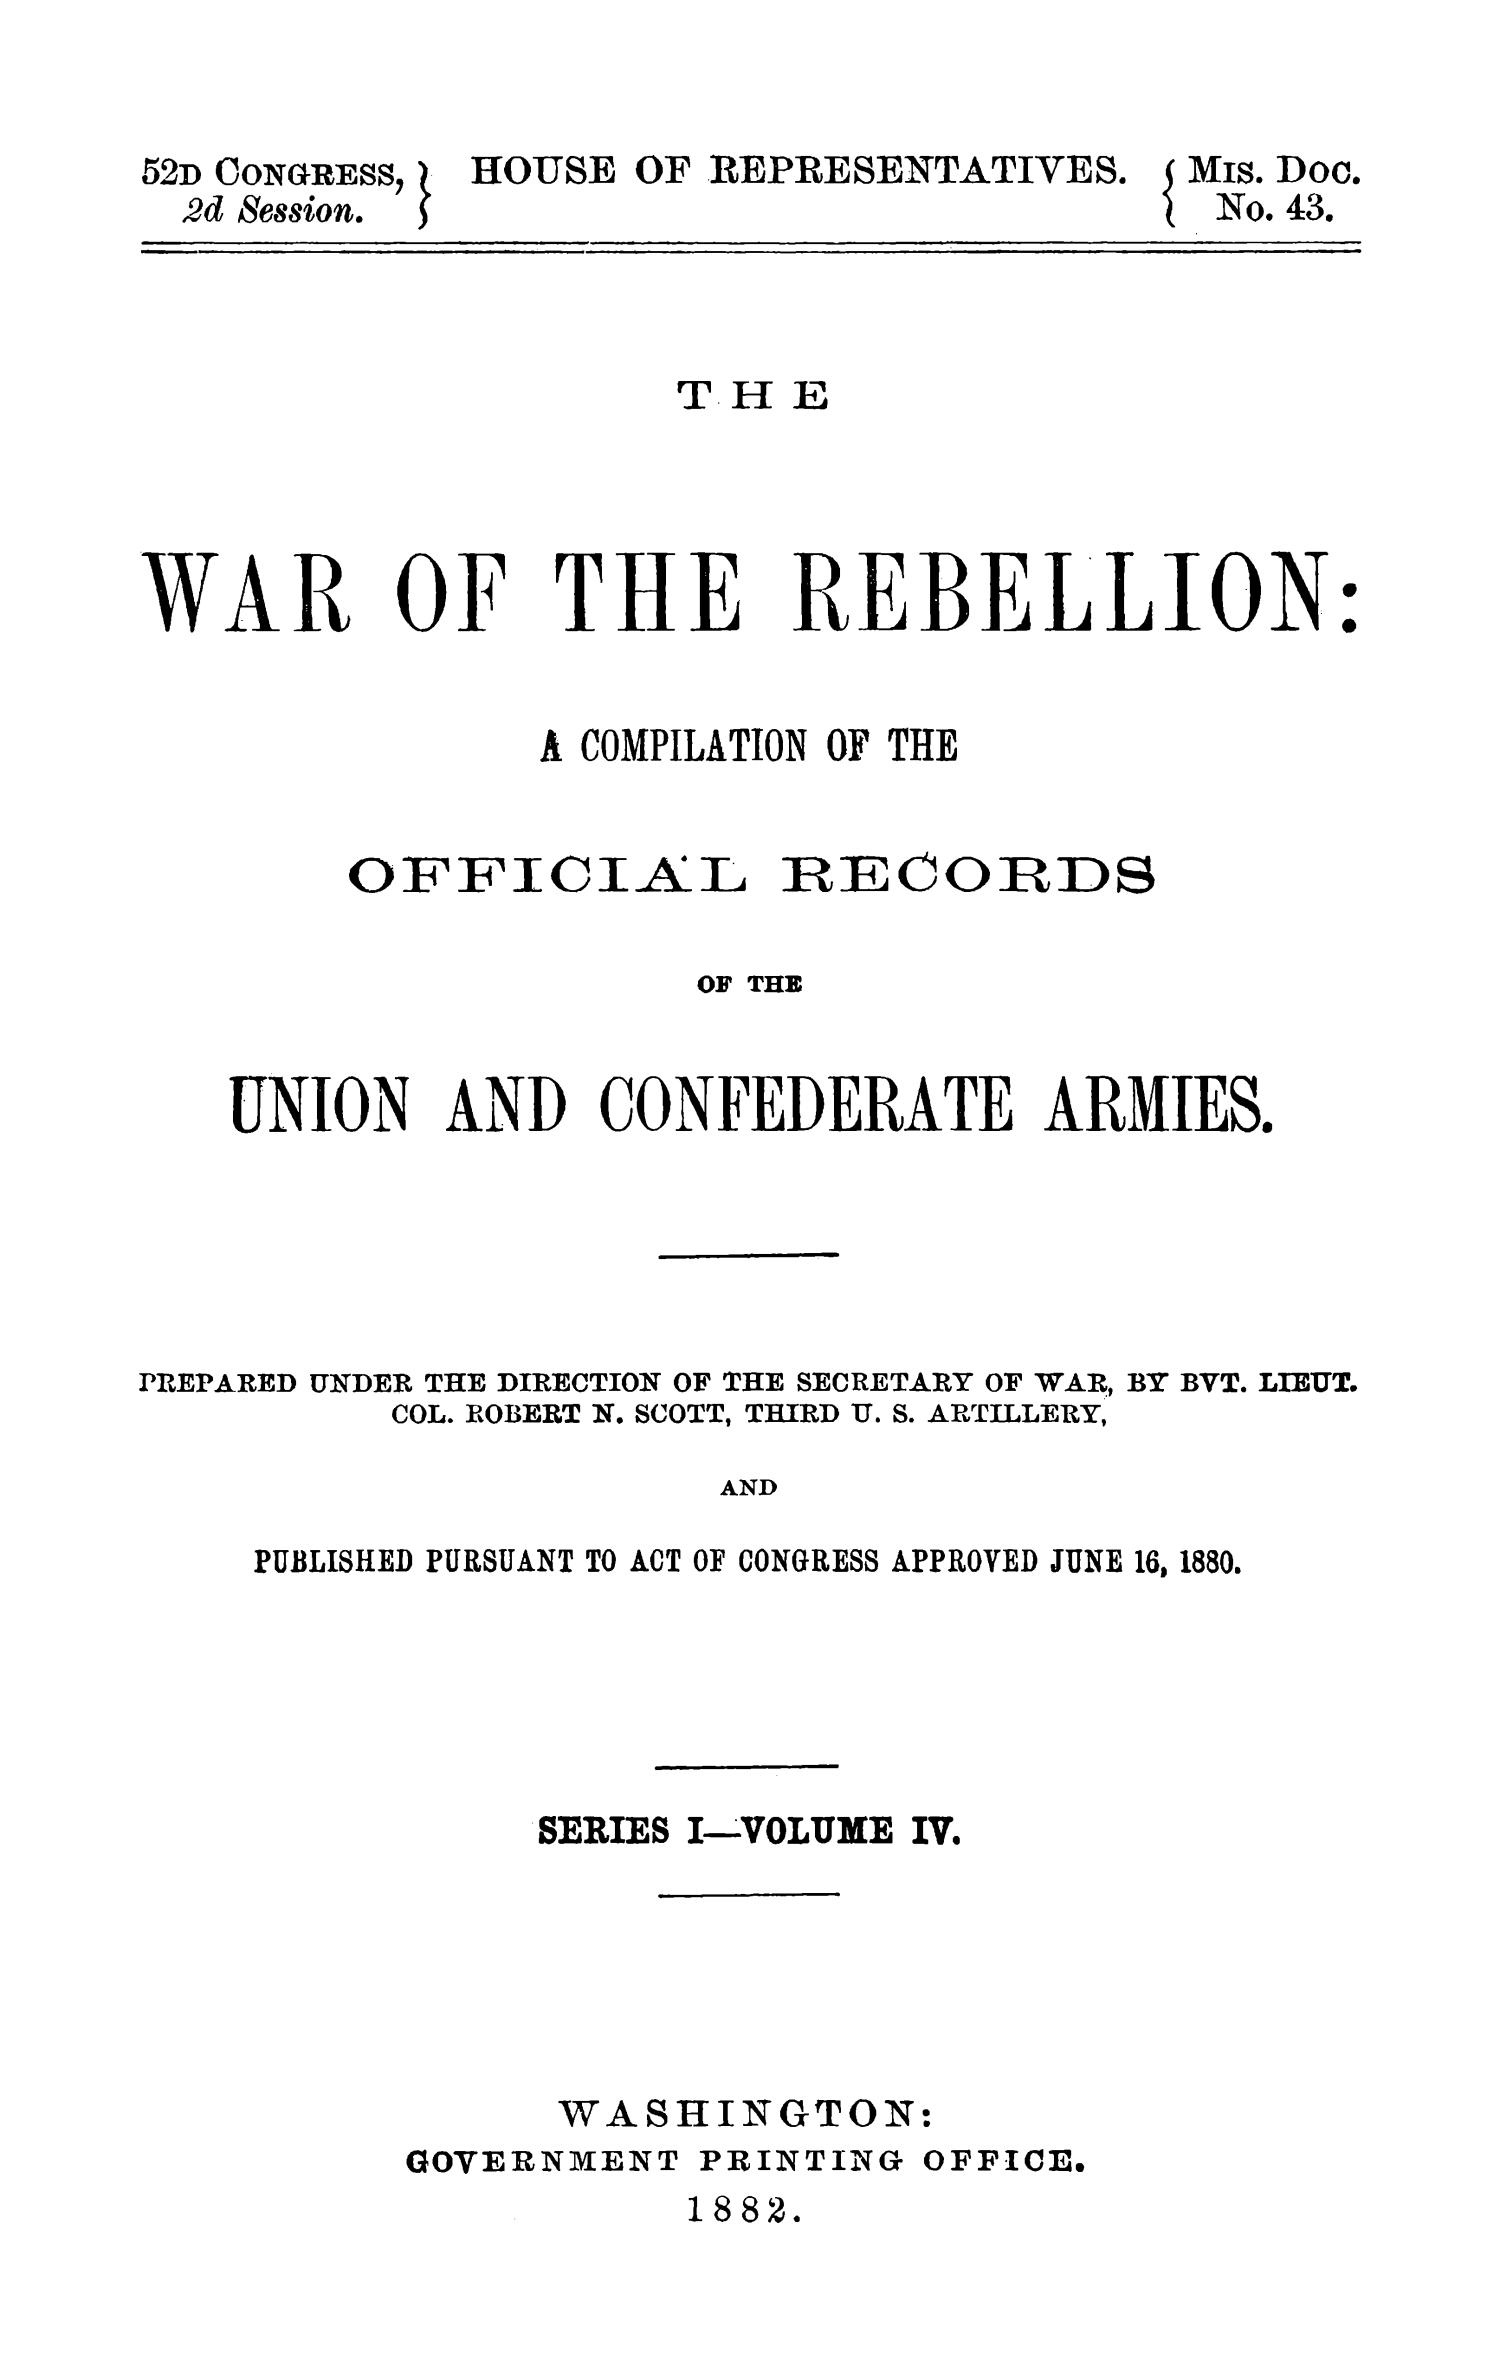 The War of the Rebellion: A Compilation of the Official Records of the Union And Confederate Armies. Series 1, Volume 4.
                                                
                                                    Title Page
                                                